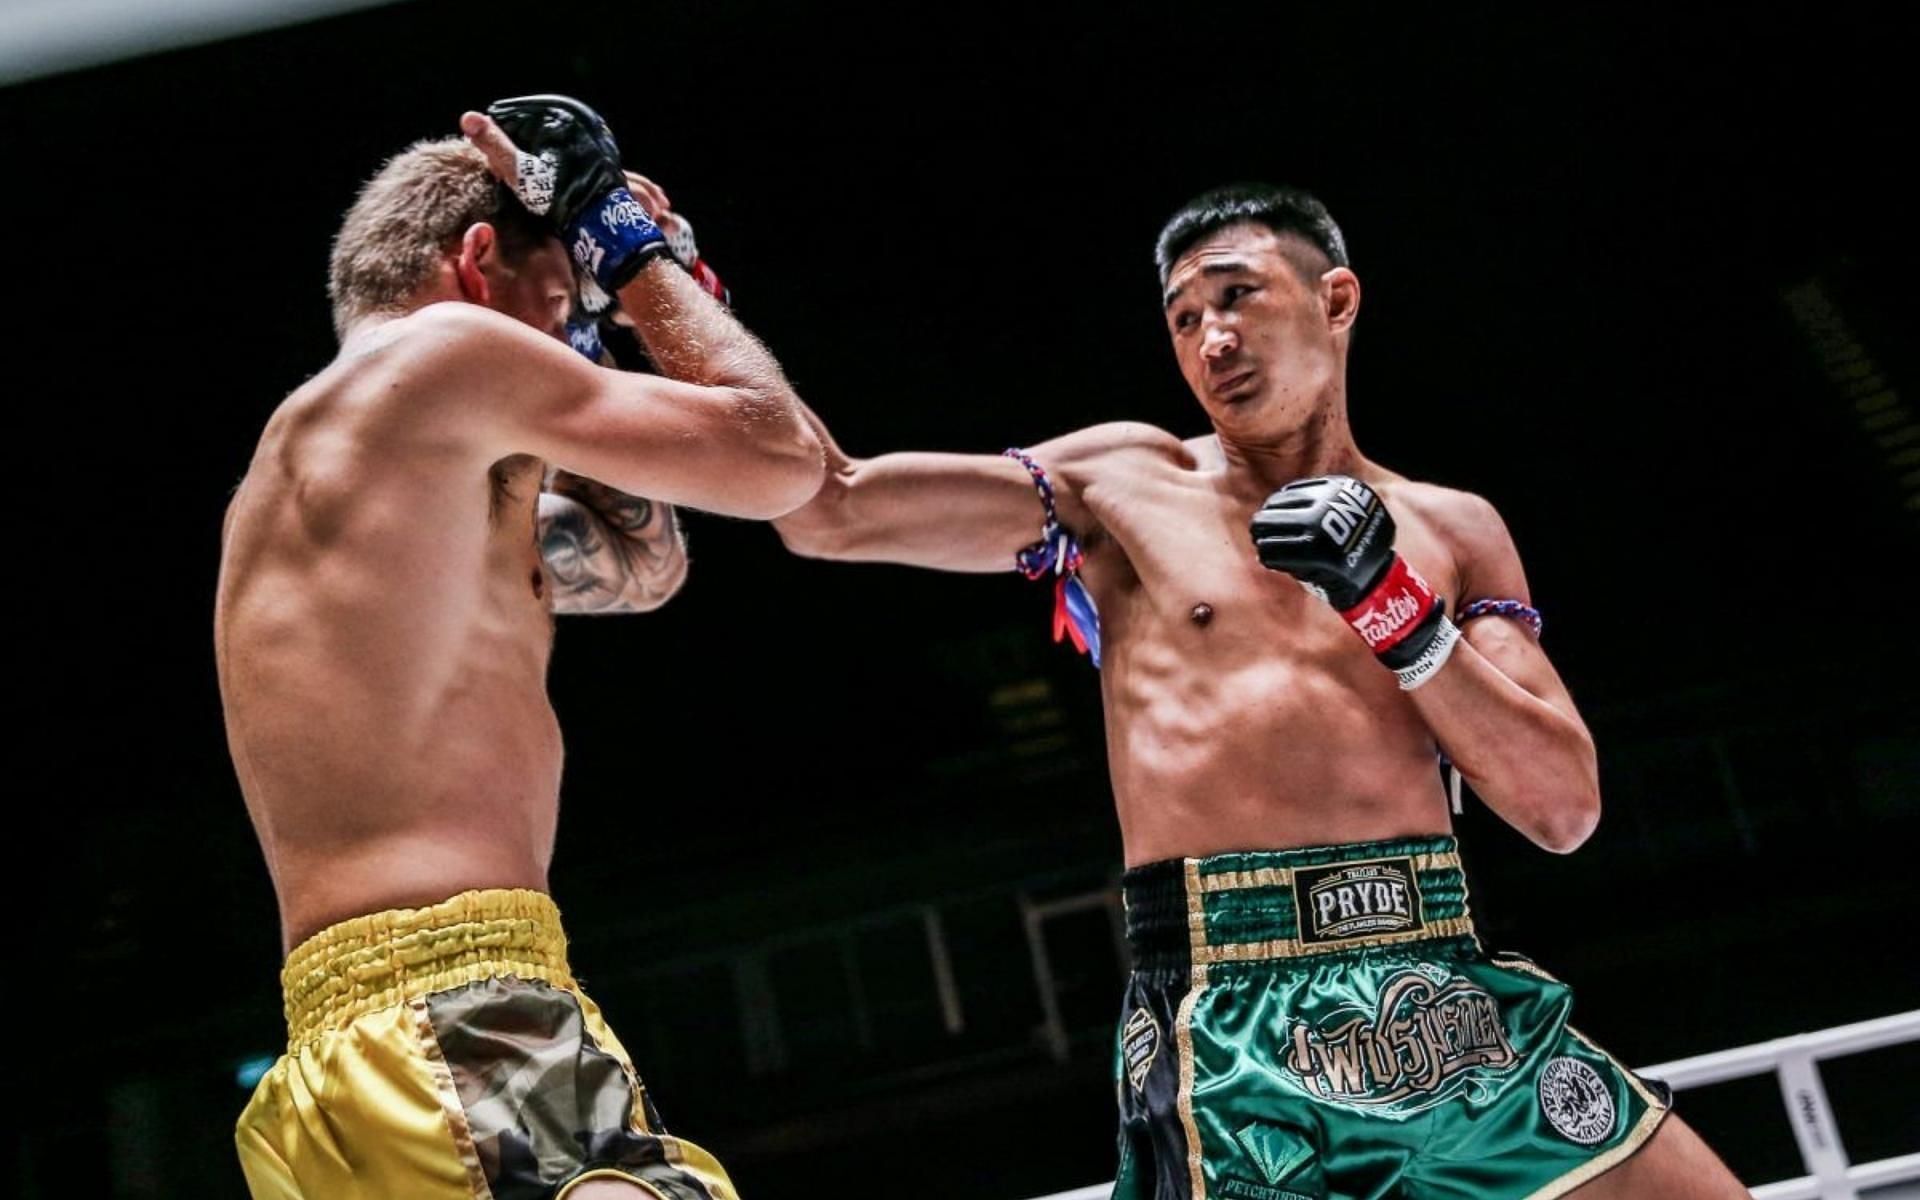 ONE featherweight Muay Thai champion Petchmorakot Petchyindee (right) put on a show against Magnus Andersson (left) back in 2019. (Image courtesy of ONE Championship)